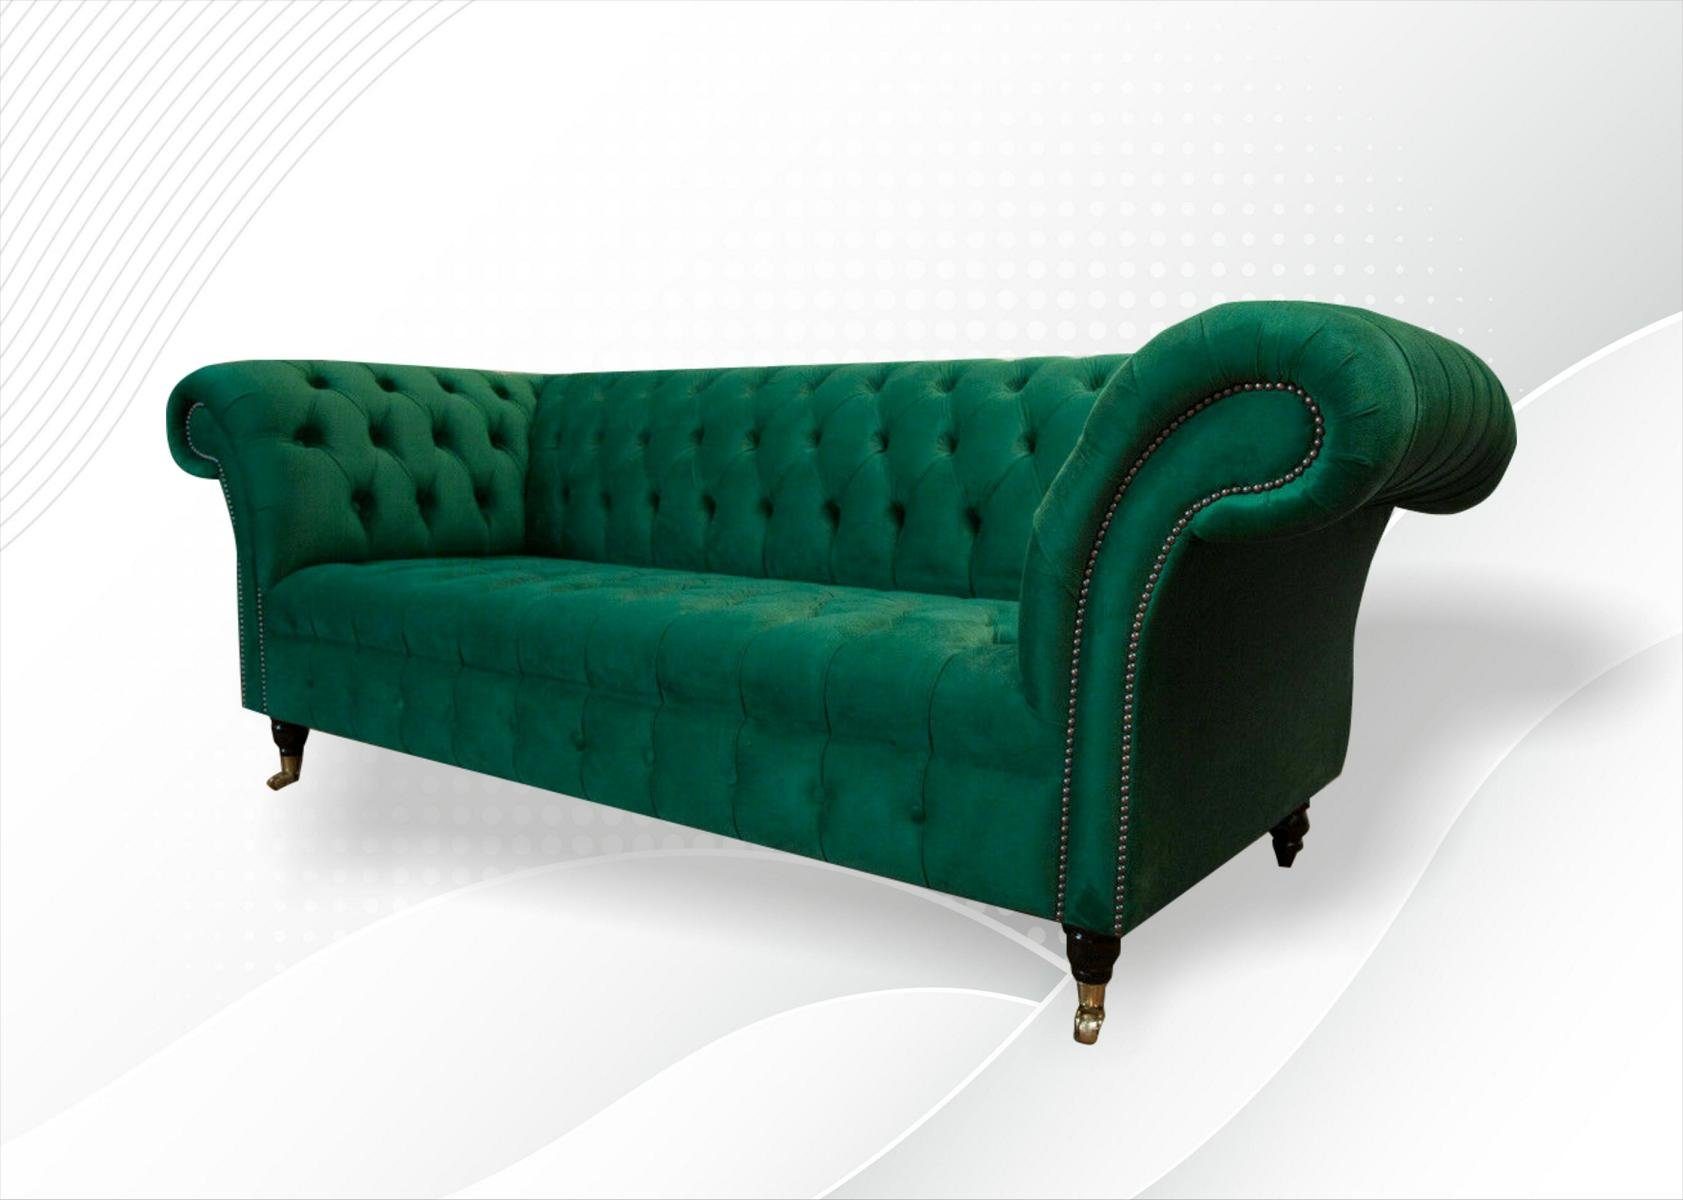 JVmoebel Chesterfield-Sofa, Chesterfield 3+1,5+1 Sitzer 3-er Sofa Couch